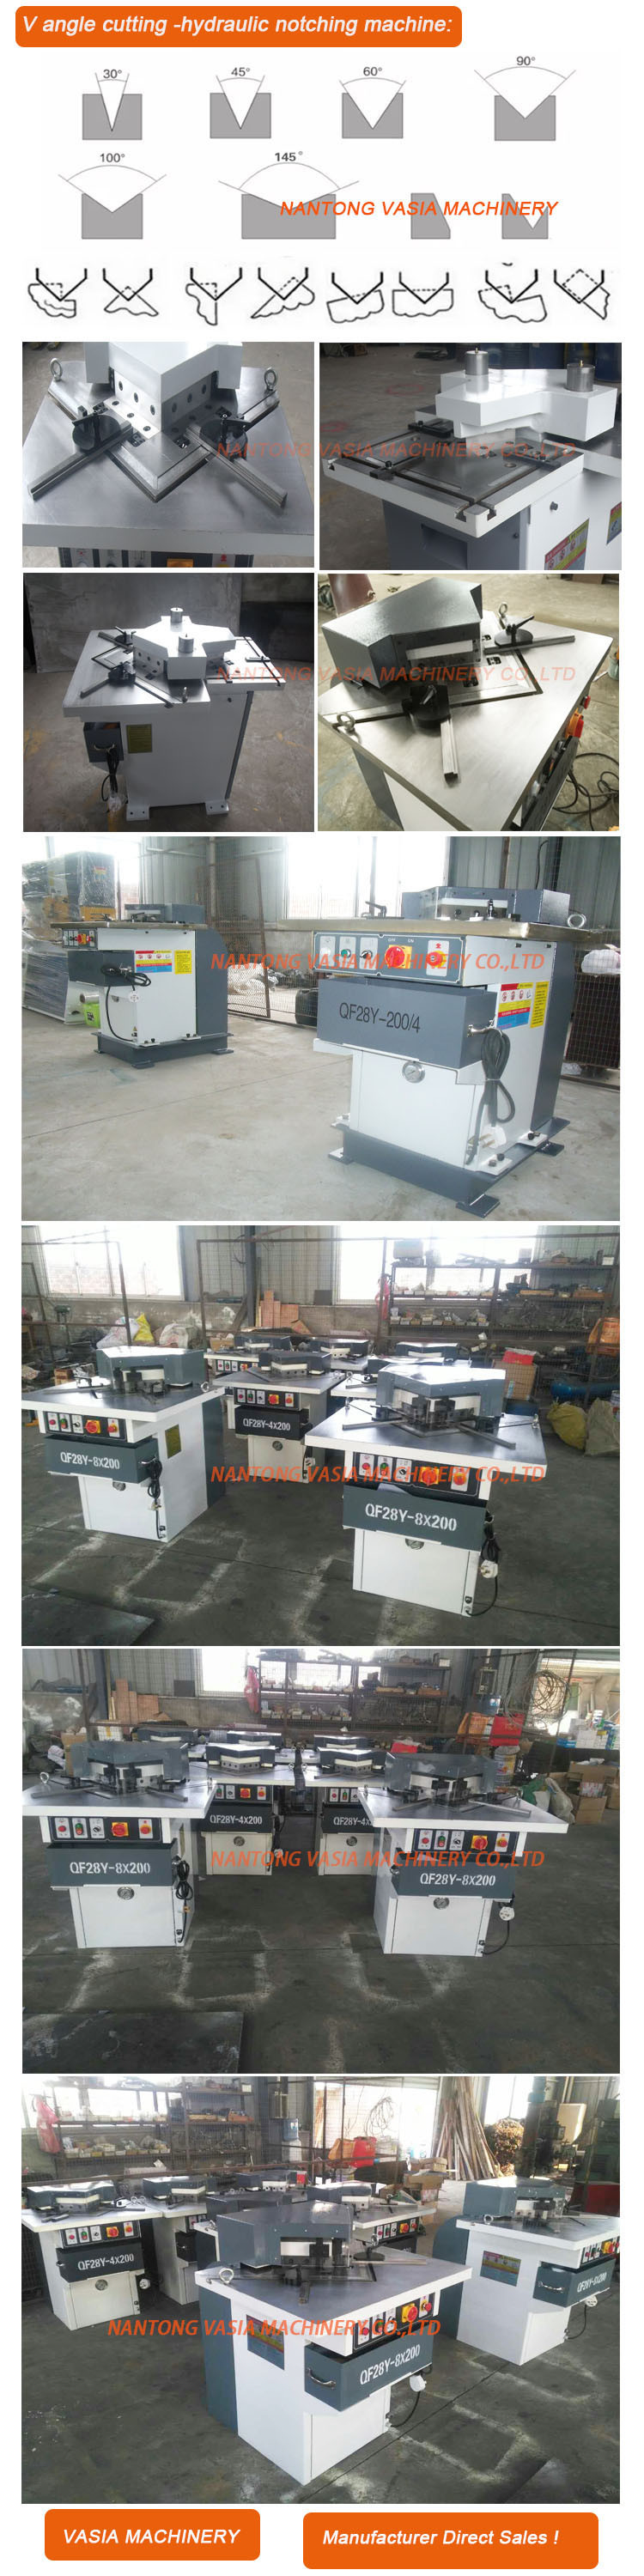 90 Degree Angle Cutting Machine with Best Factory From Vasia Machinery